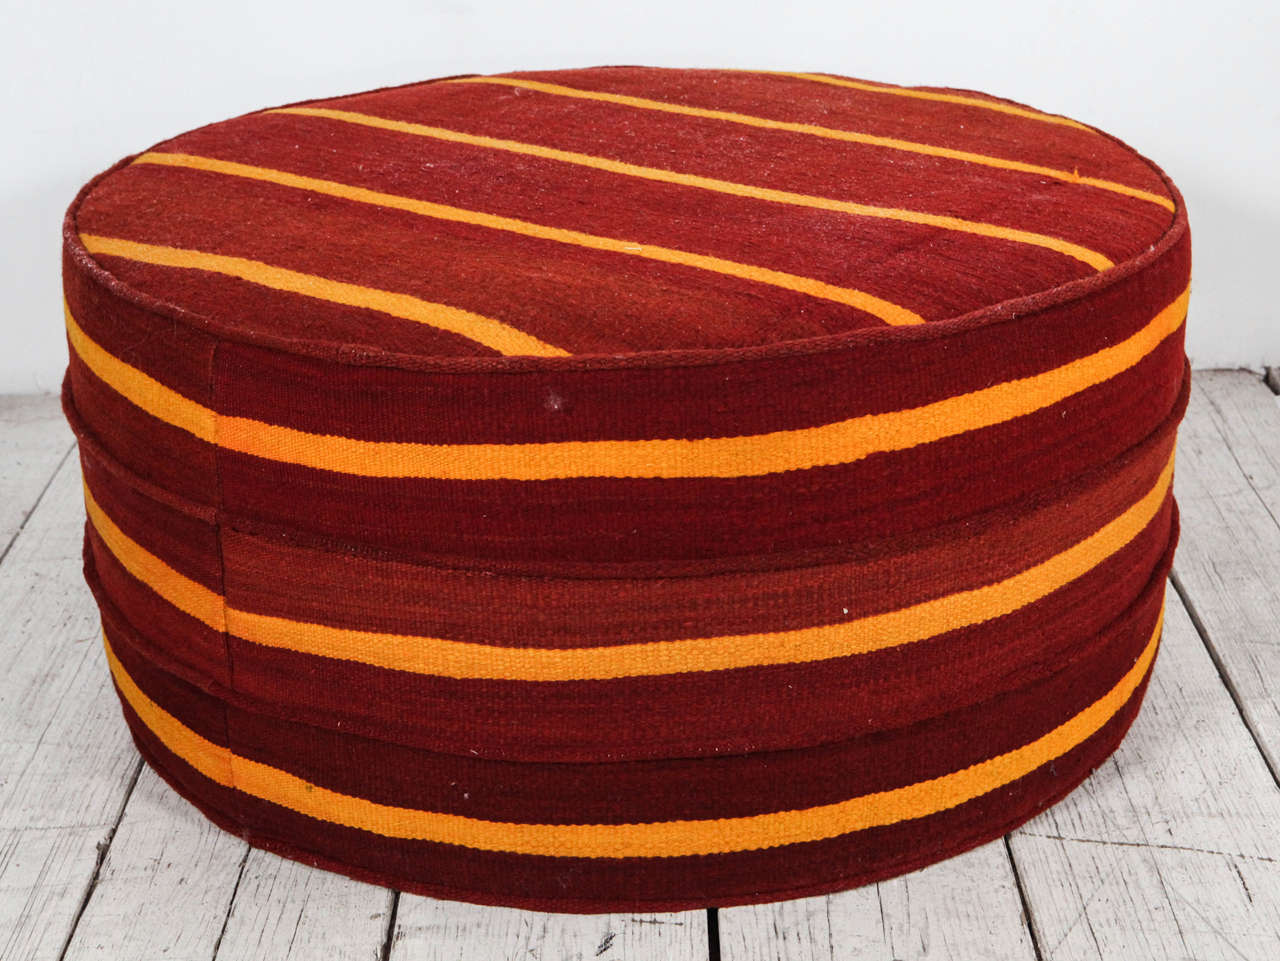 Large round ottoman in red and gold vintage kilim with three rings of piping around circumference.